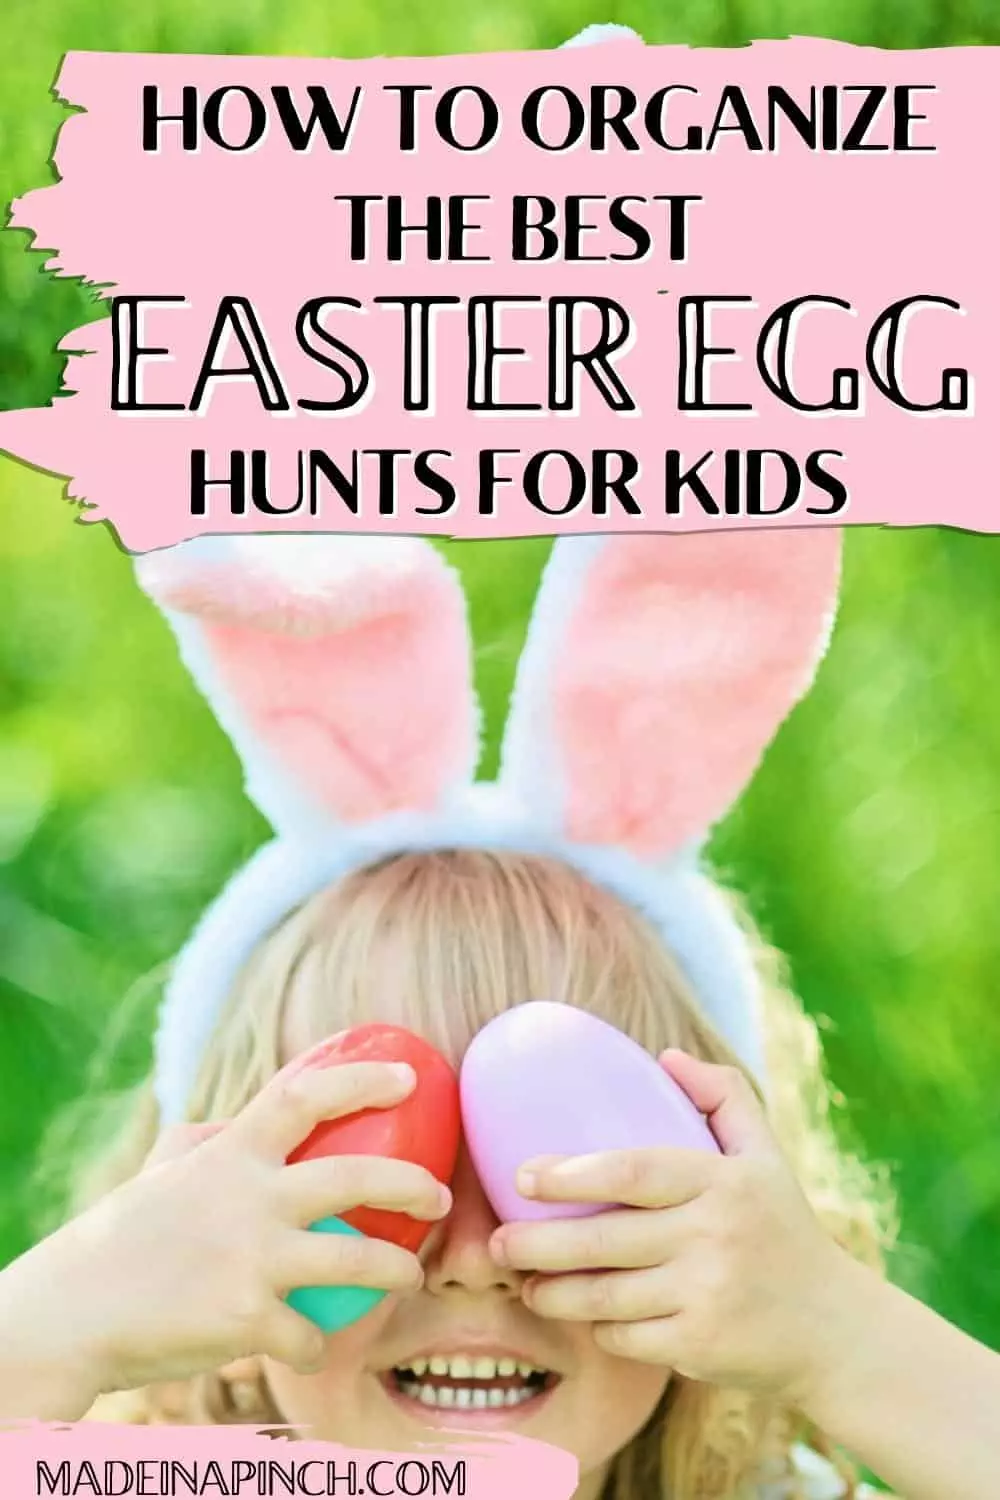 Easter egg hunts are classic, fun activities that kids LOVE doing. Organize the best easter egg hunt in town with these EASY tips! Perfect for any home and any age! #easter #easteregg #easteregghunt